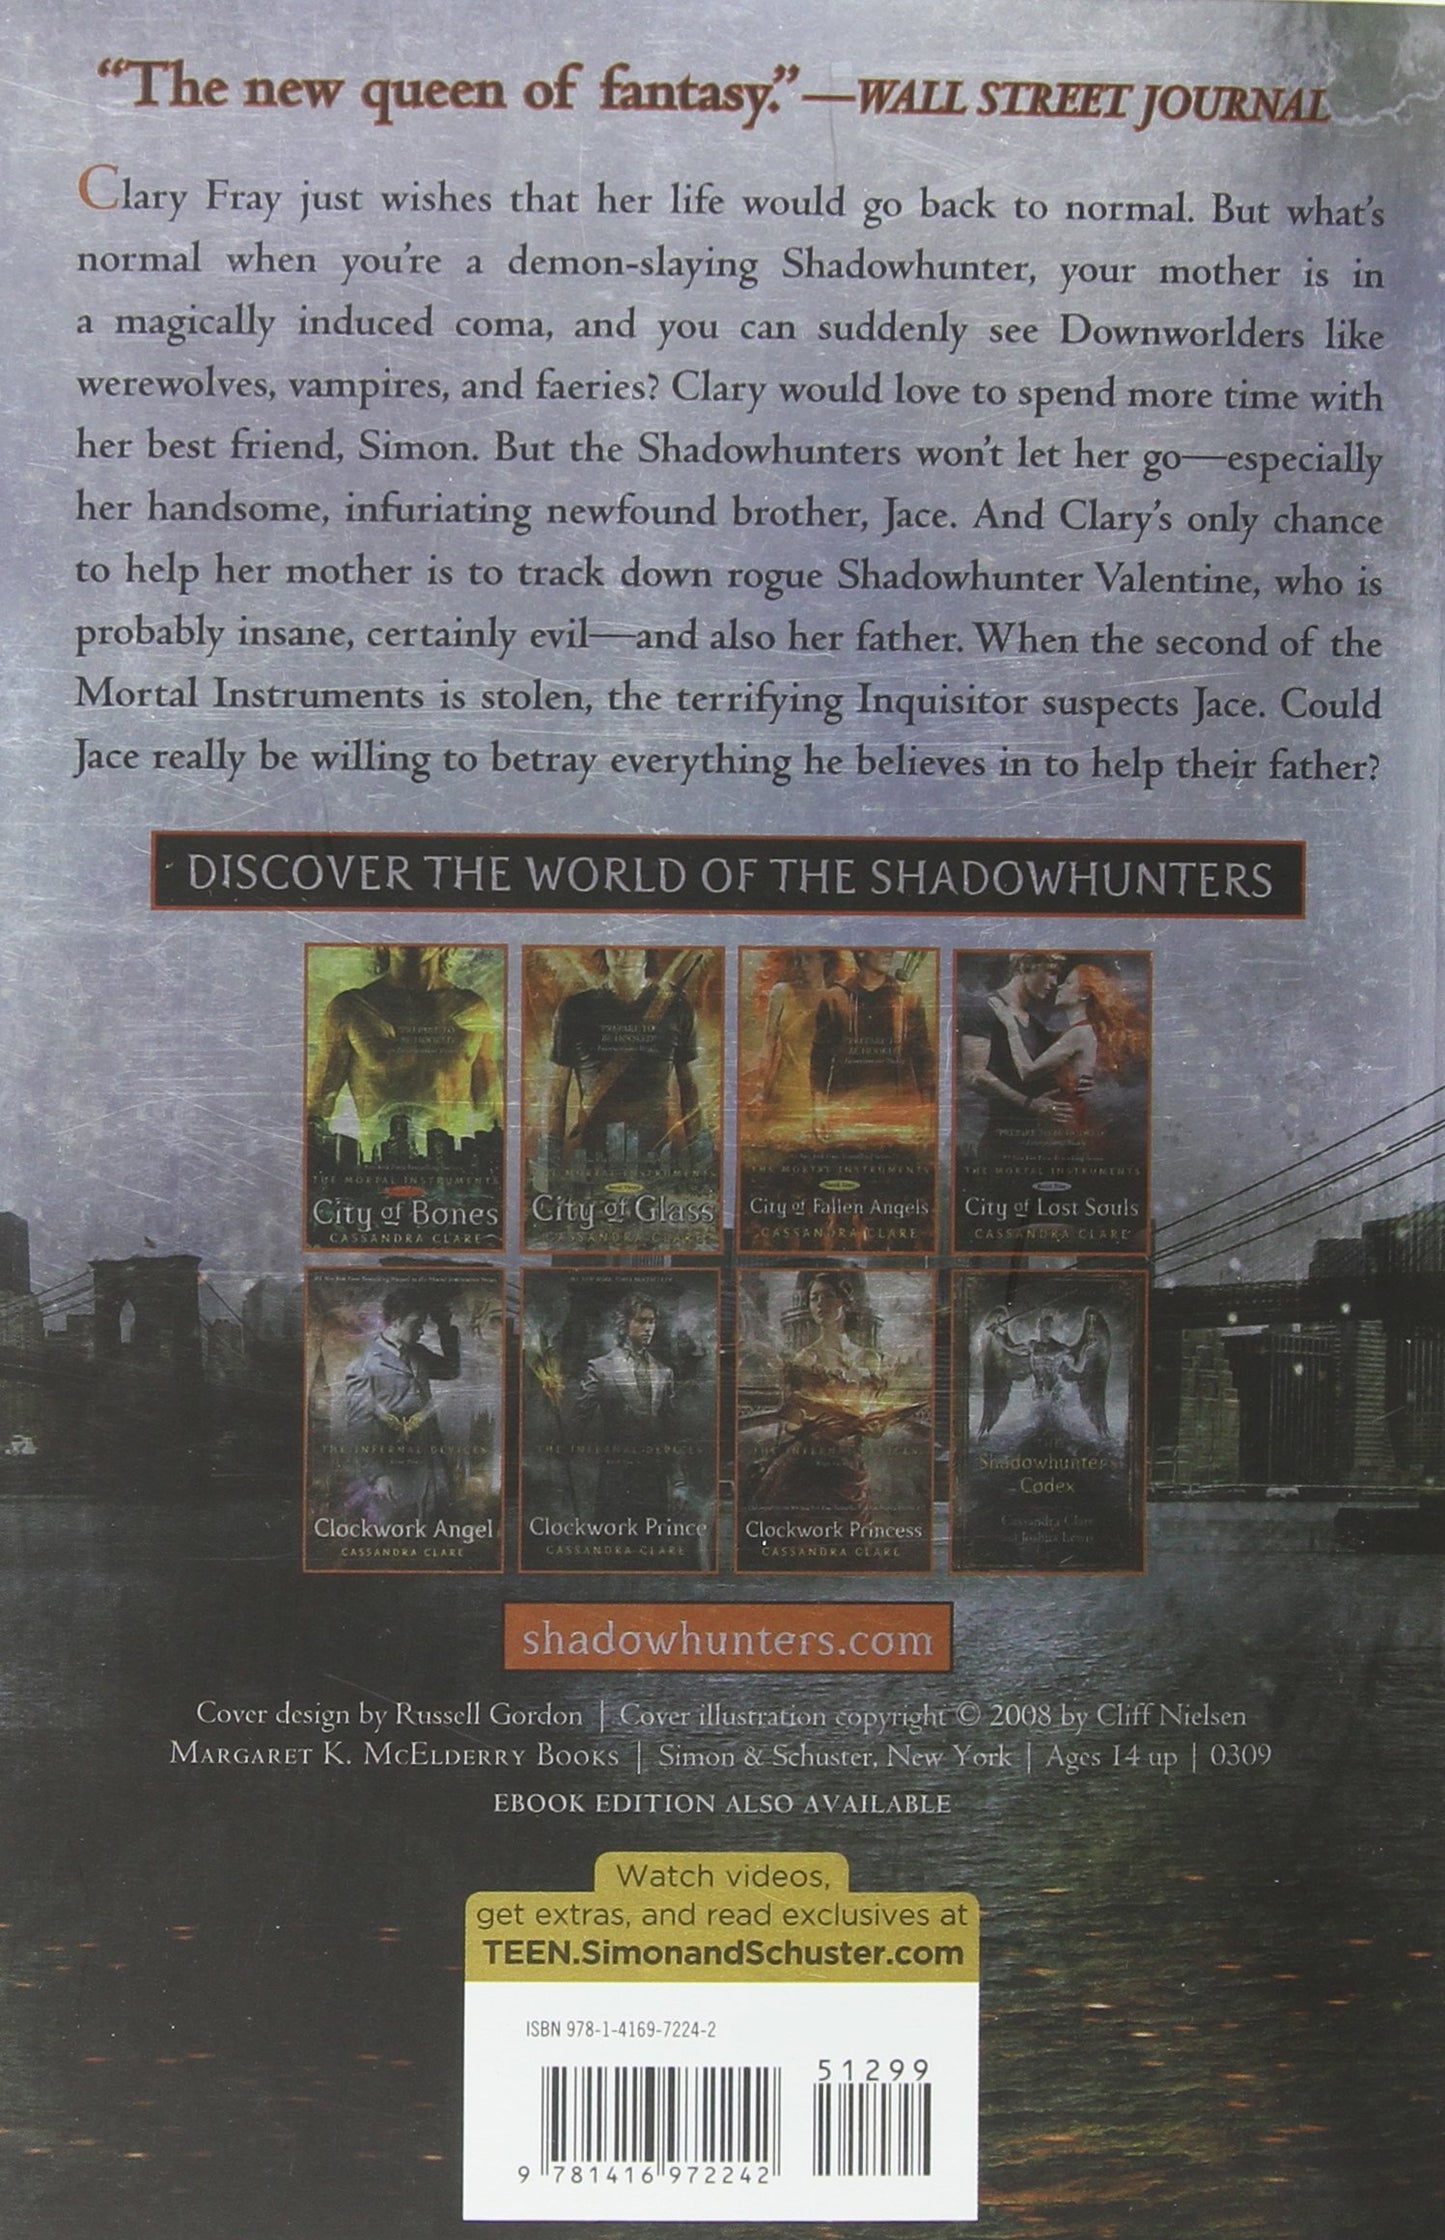 The Mortal Instruments  2 : City of Ashes - Booksondemand